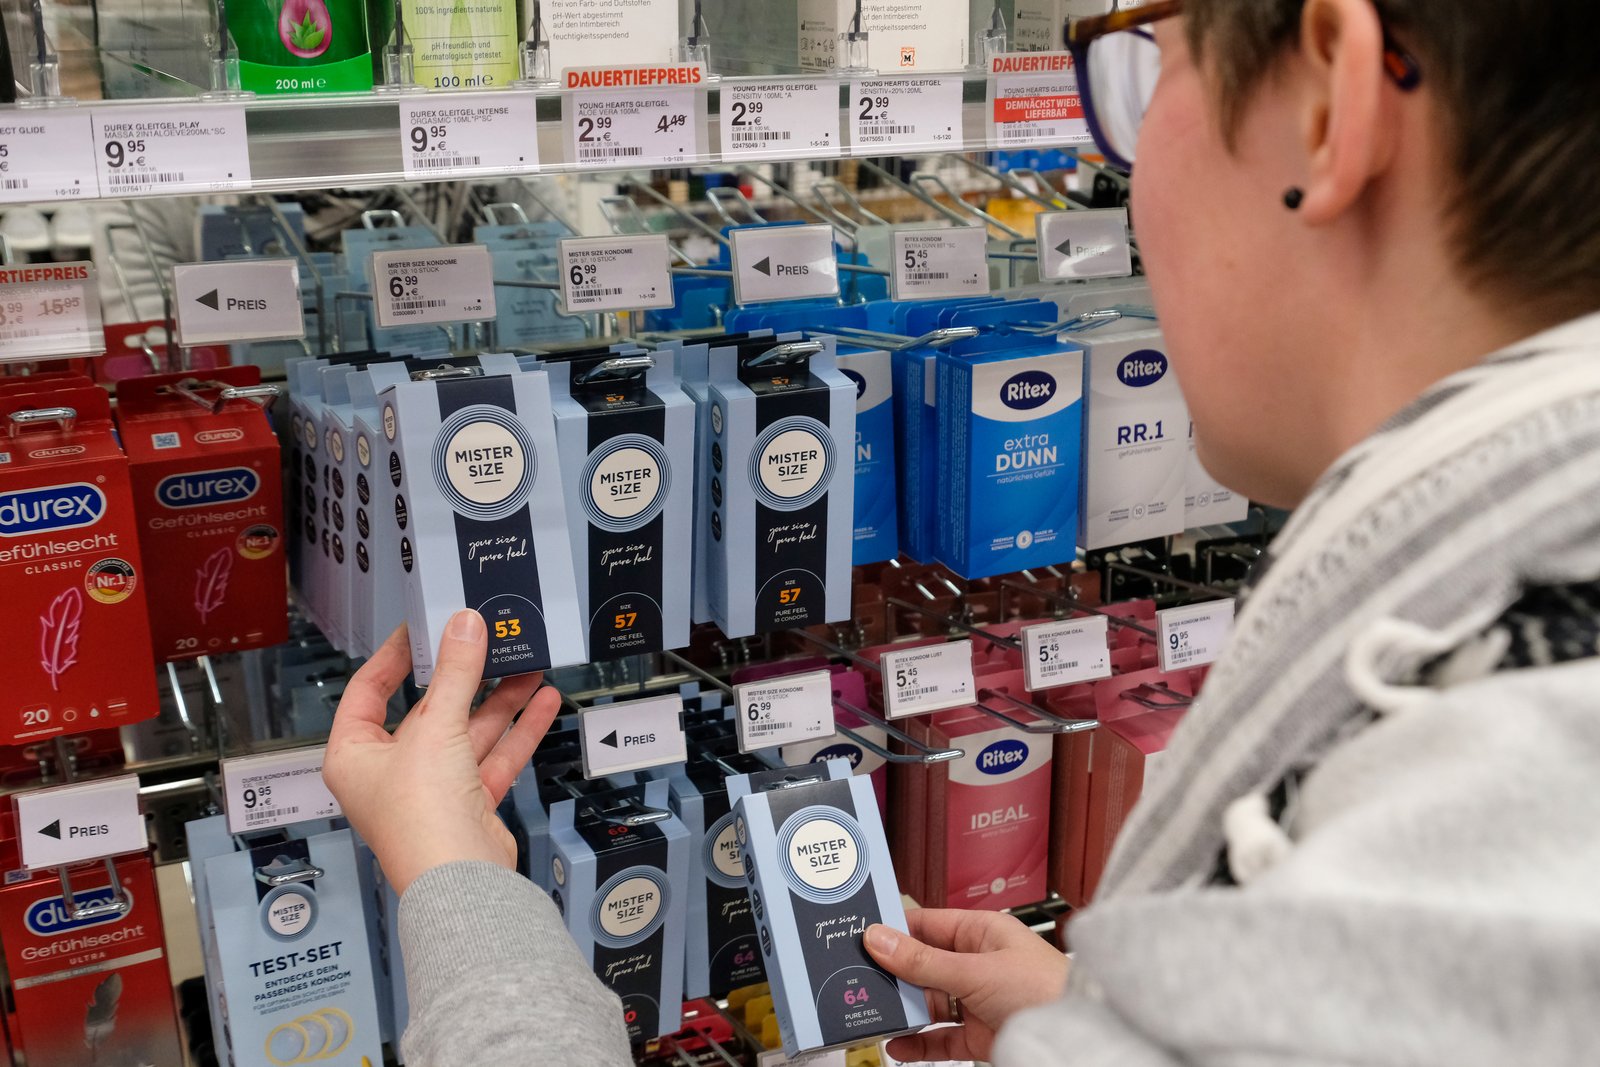 A customer in front of the condom shelf with Mister Size condoms at Müller drugstore